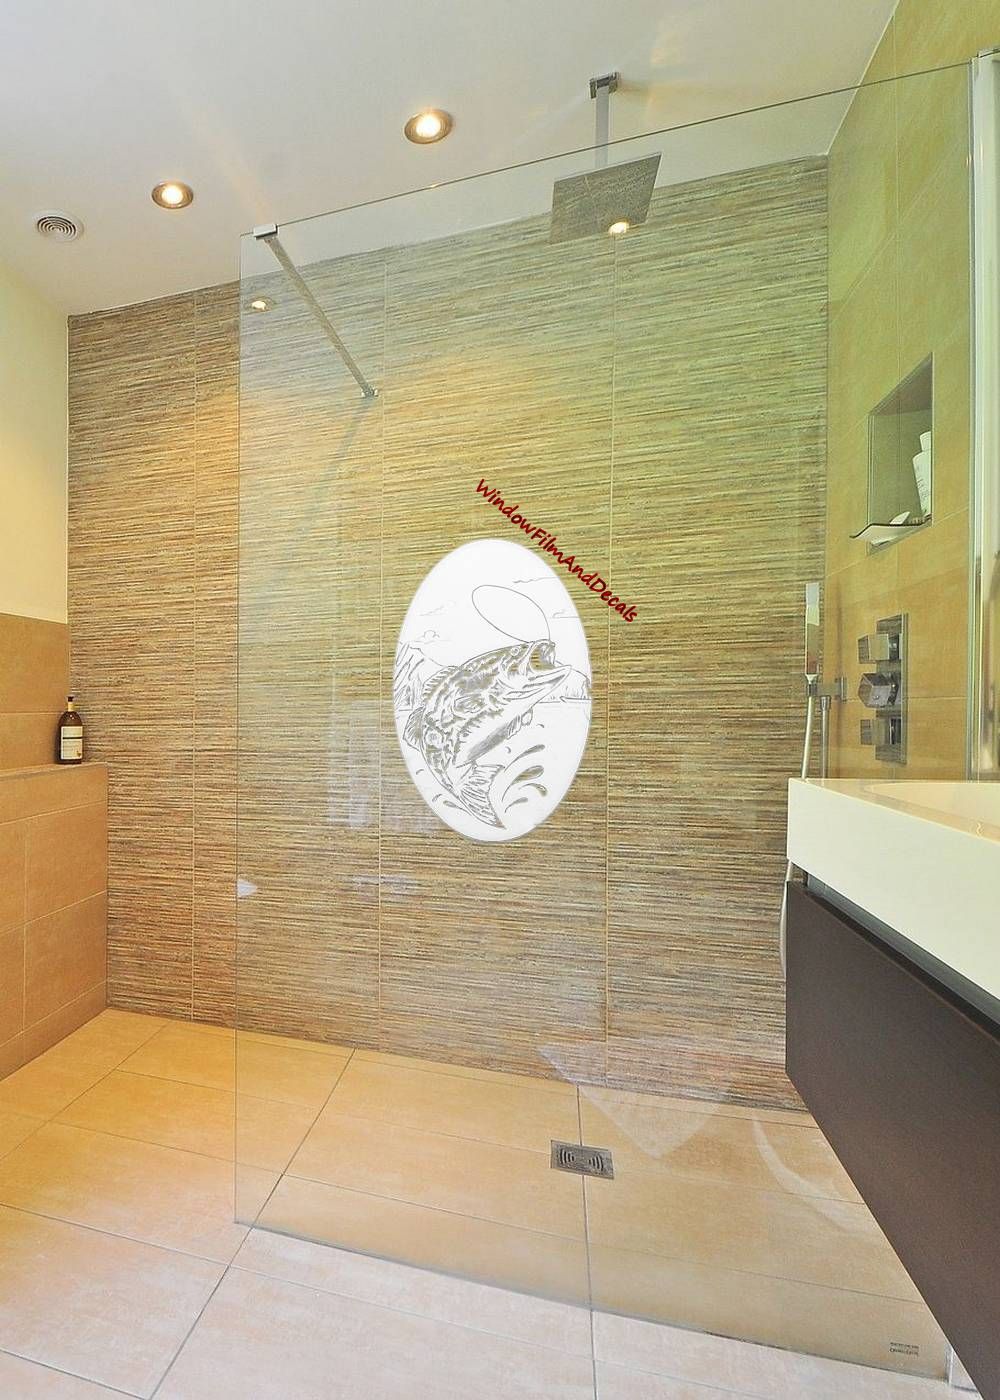 Bass Fishing Etched Glass Static Cling Decal on Glass Shower Door